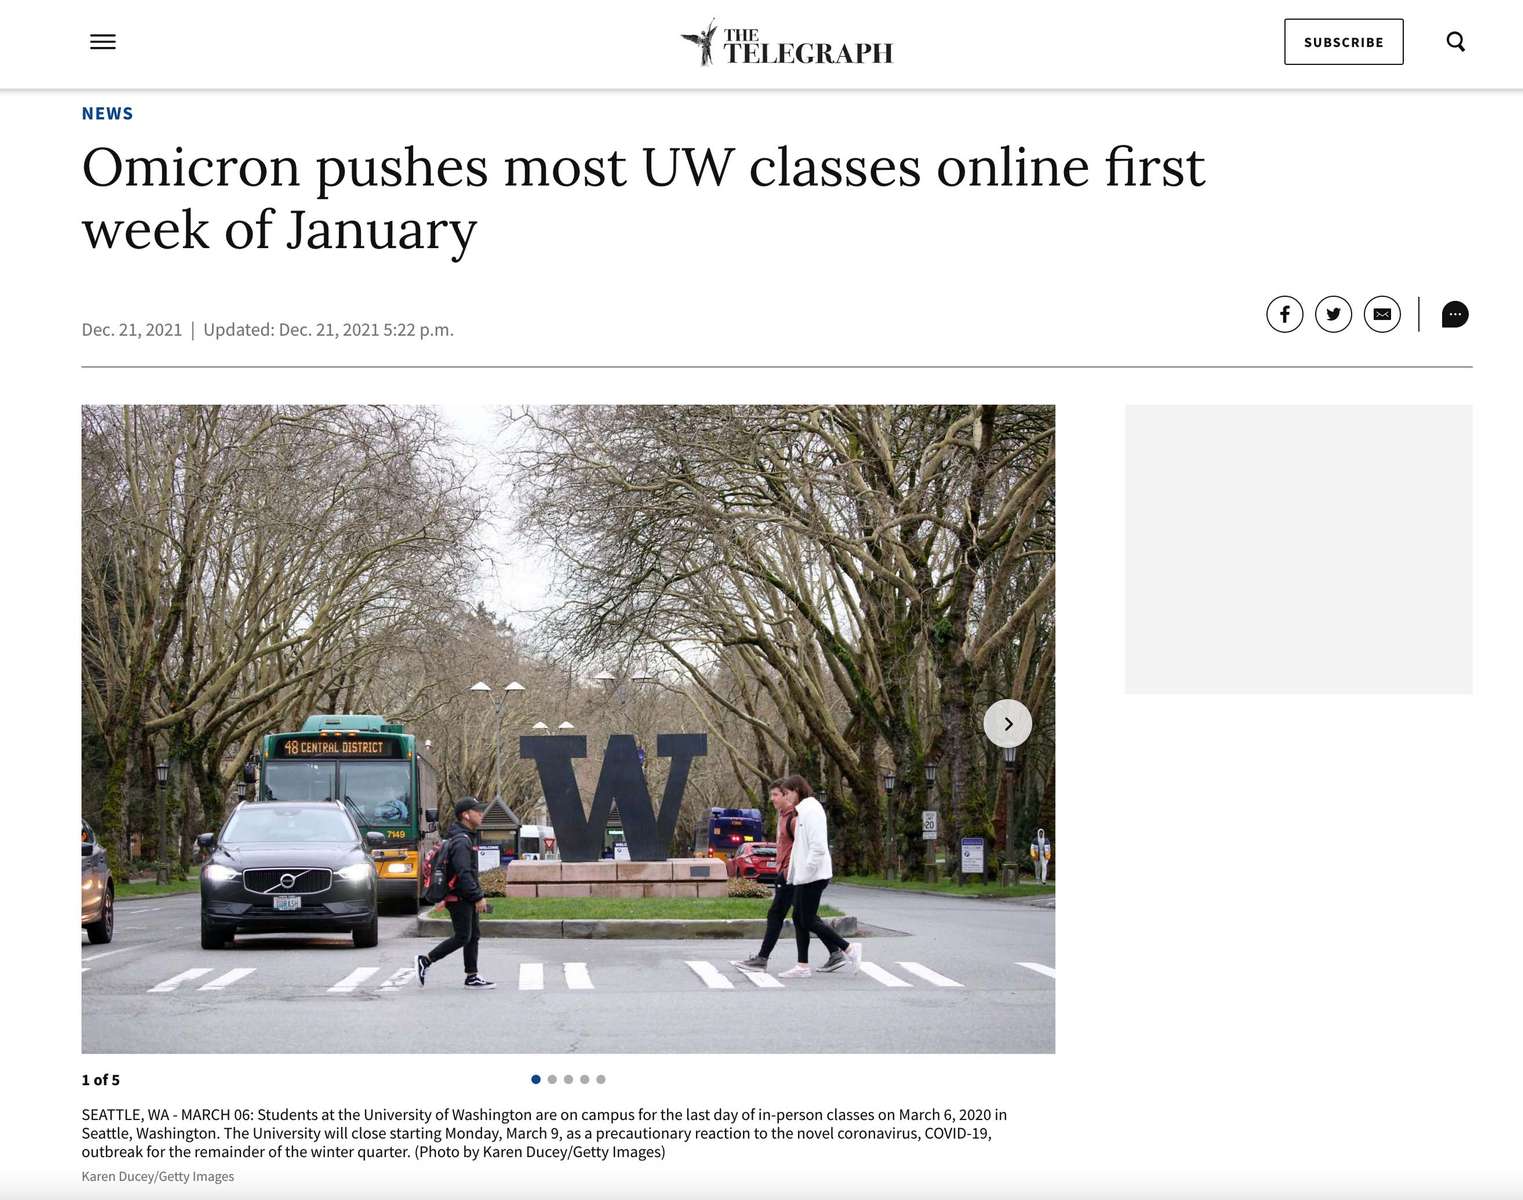 {quote}Omicron pushes most UW classes online first week of January{quote} for Getty Images published in The Telegraph December 21, 2021.